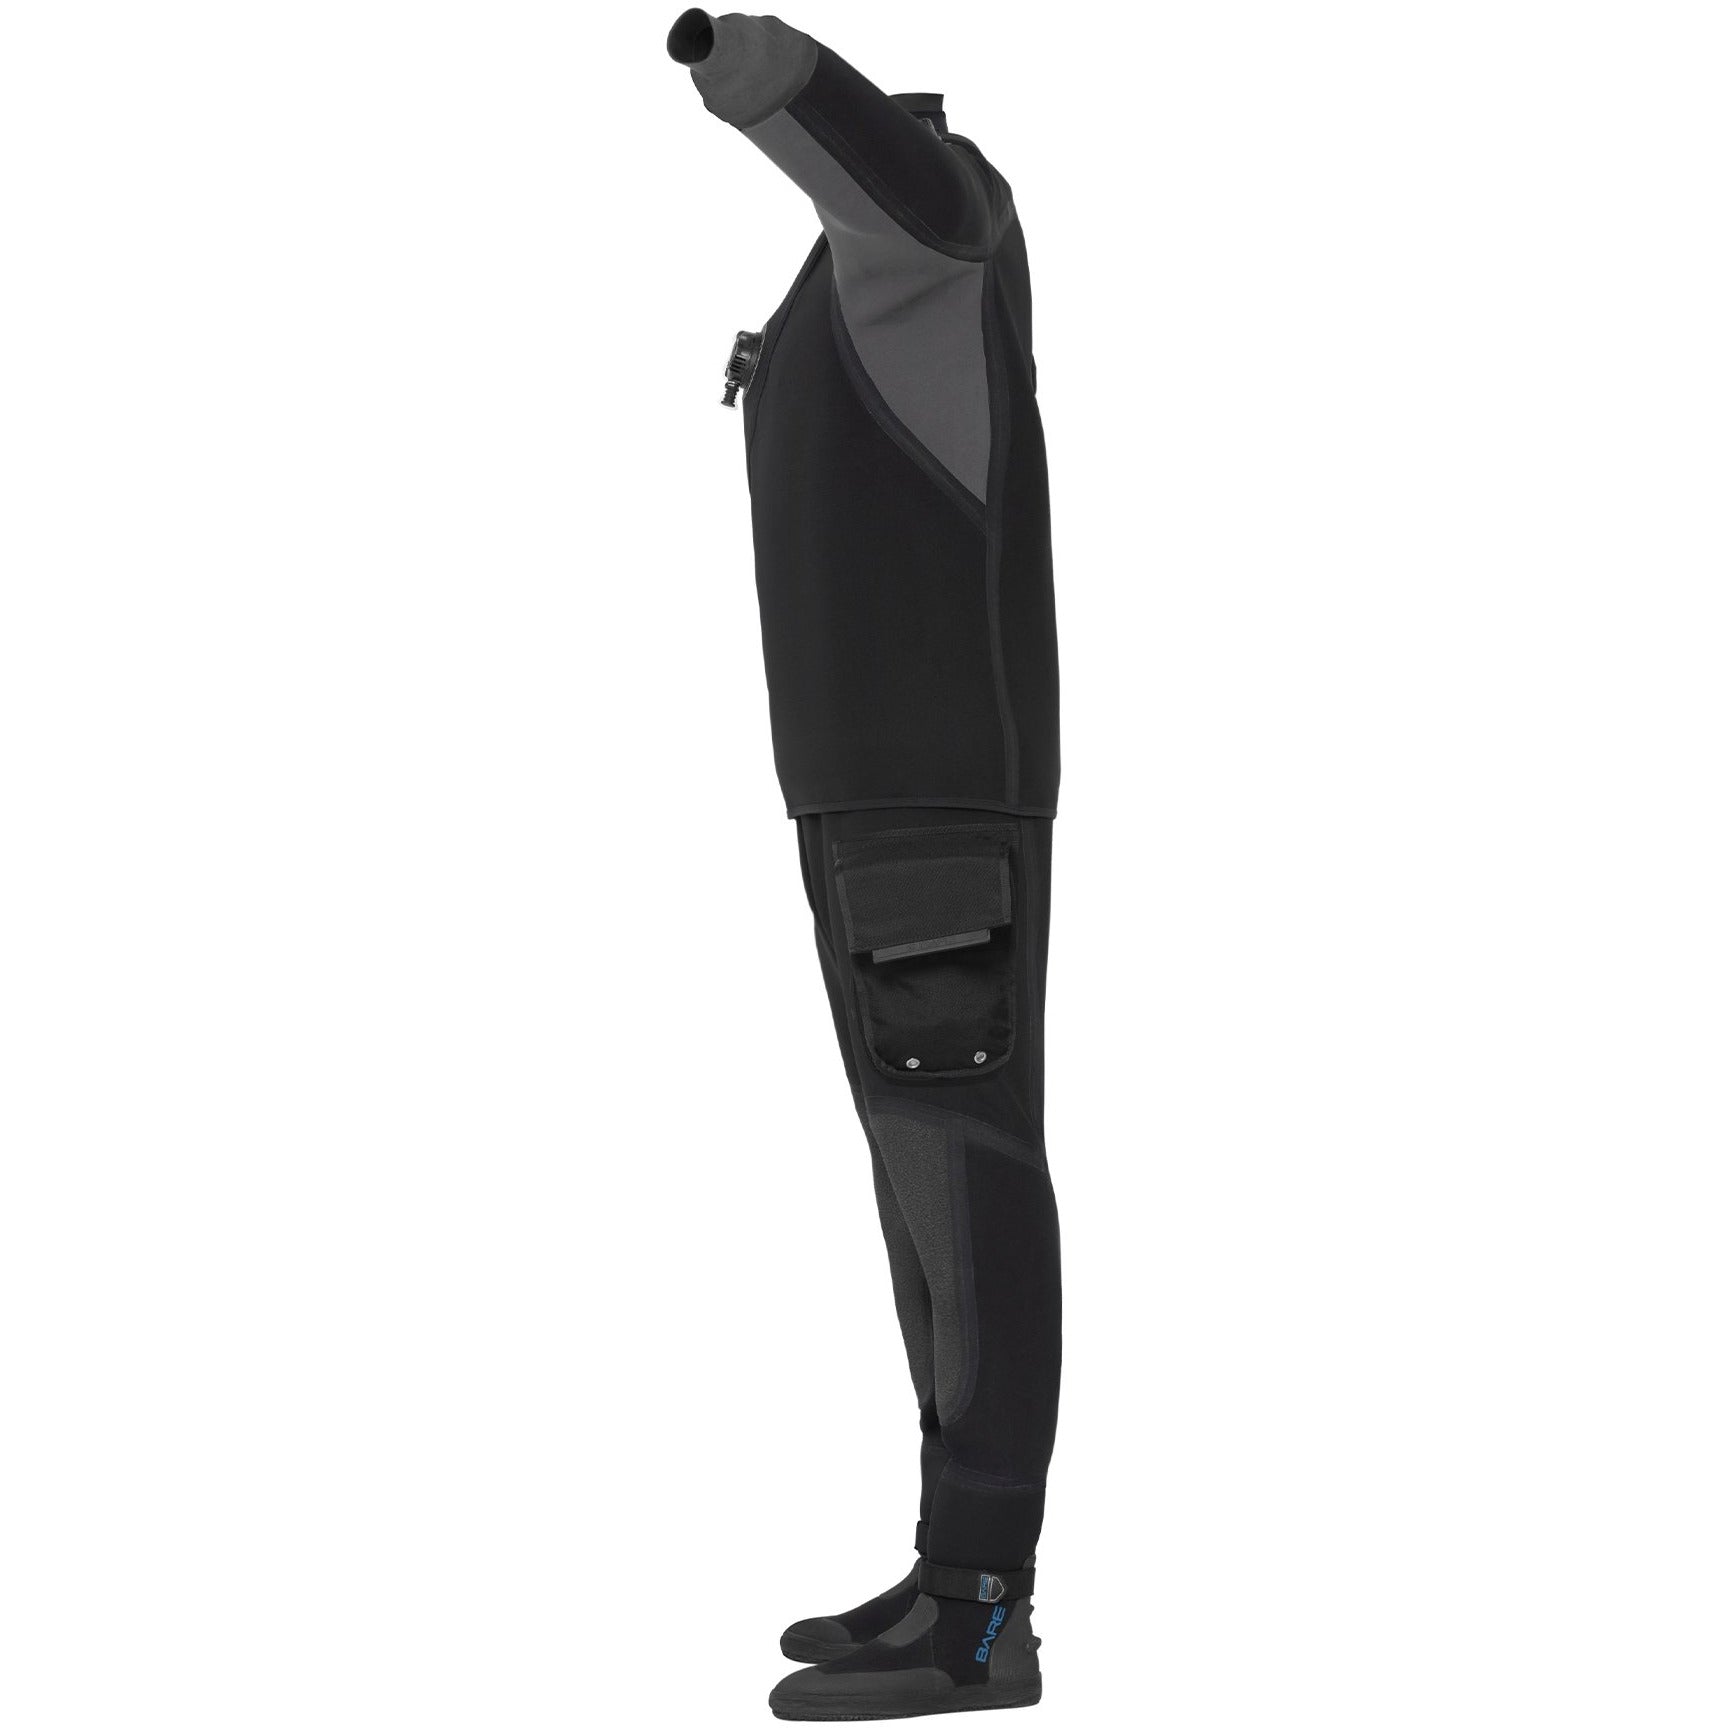 Bare Bare Sentry Tech Drysuit by Oyster Diving Shop